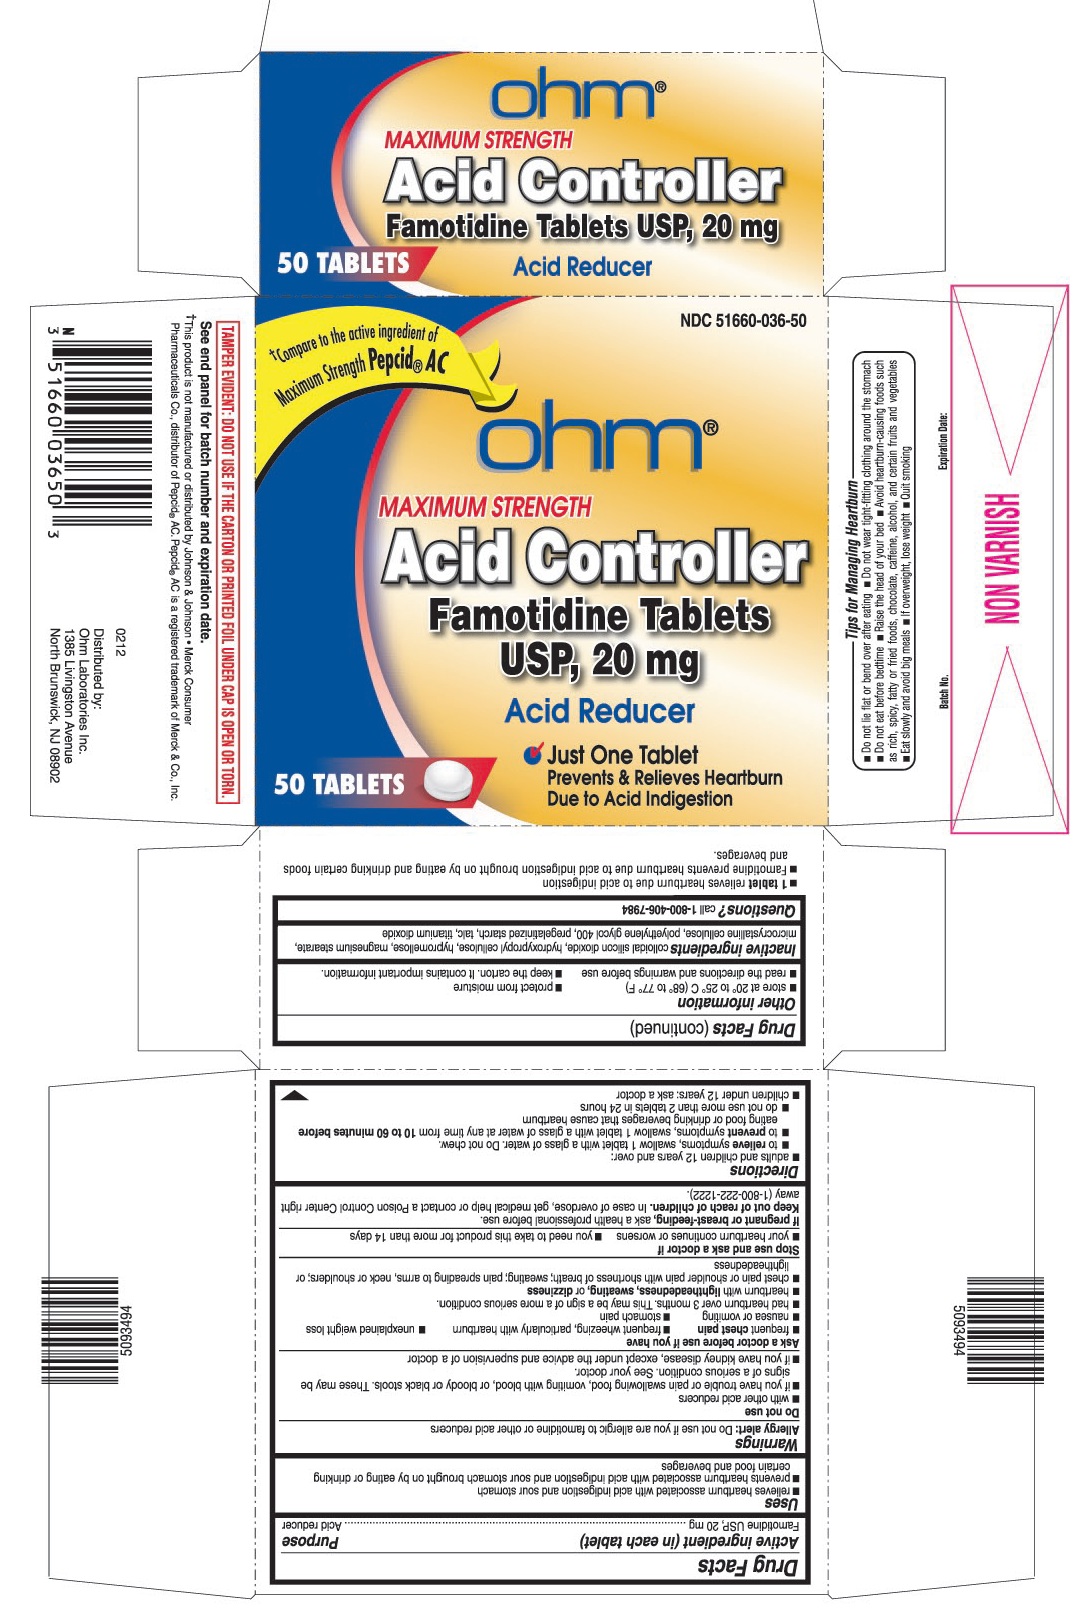 This is the 50 count bottle carton label for Famotidine tablets USP, 20 mg.